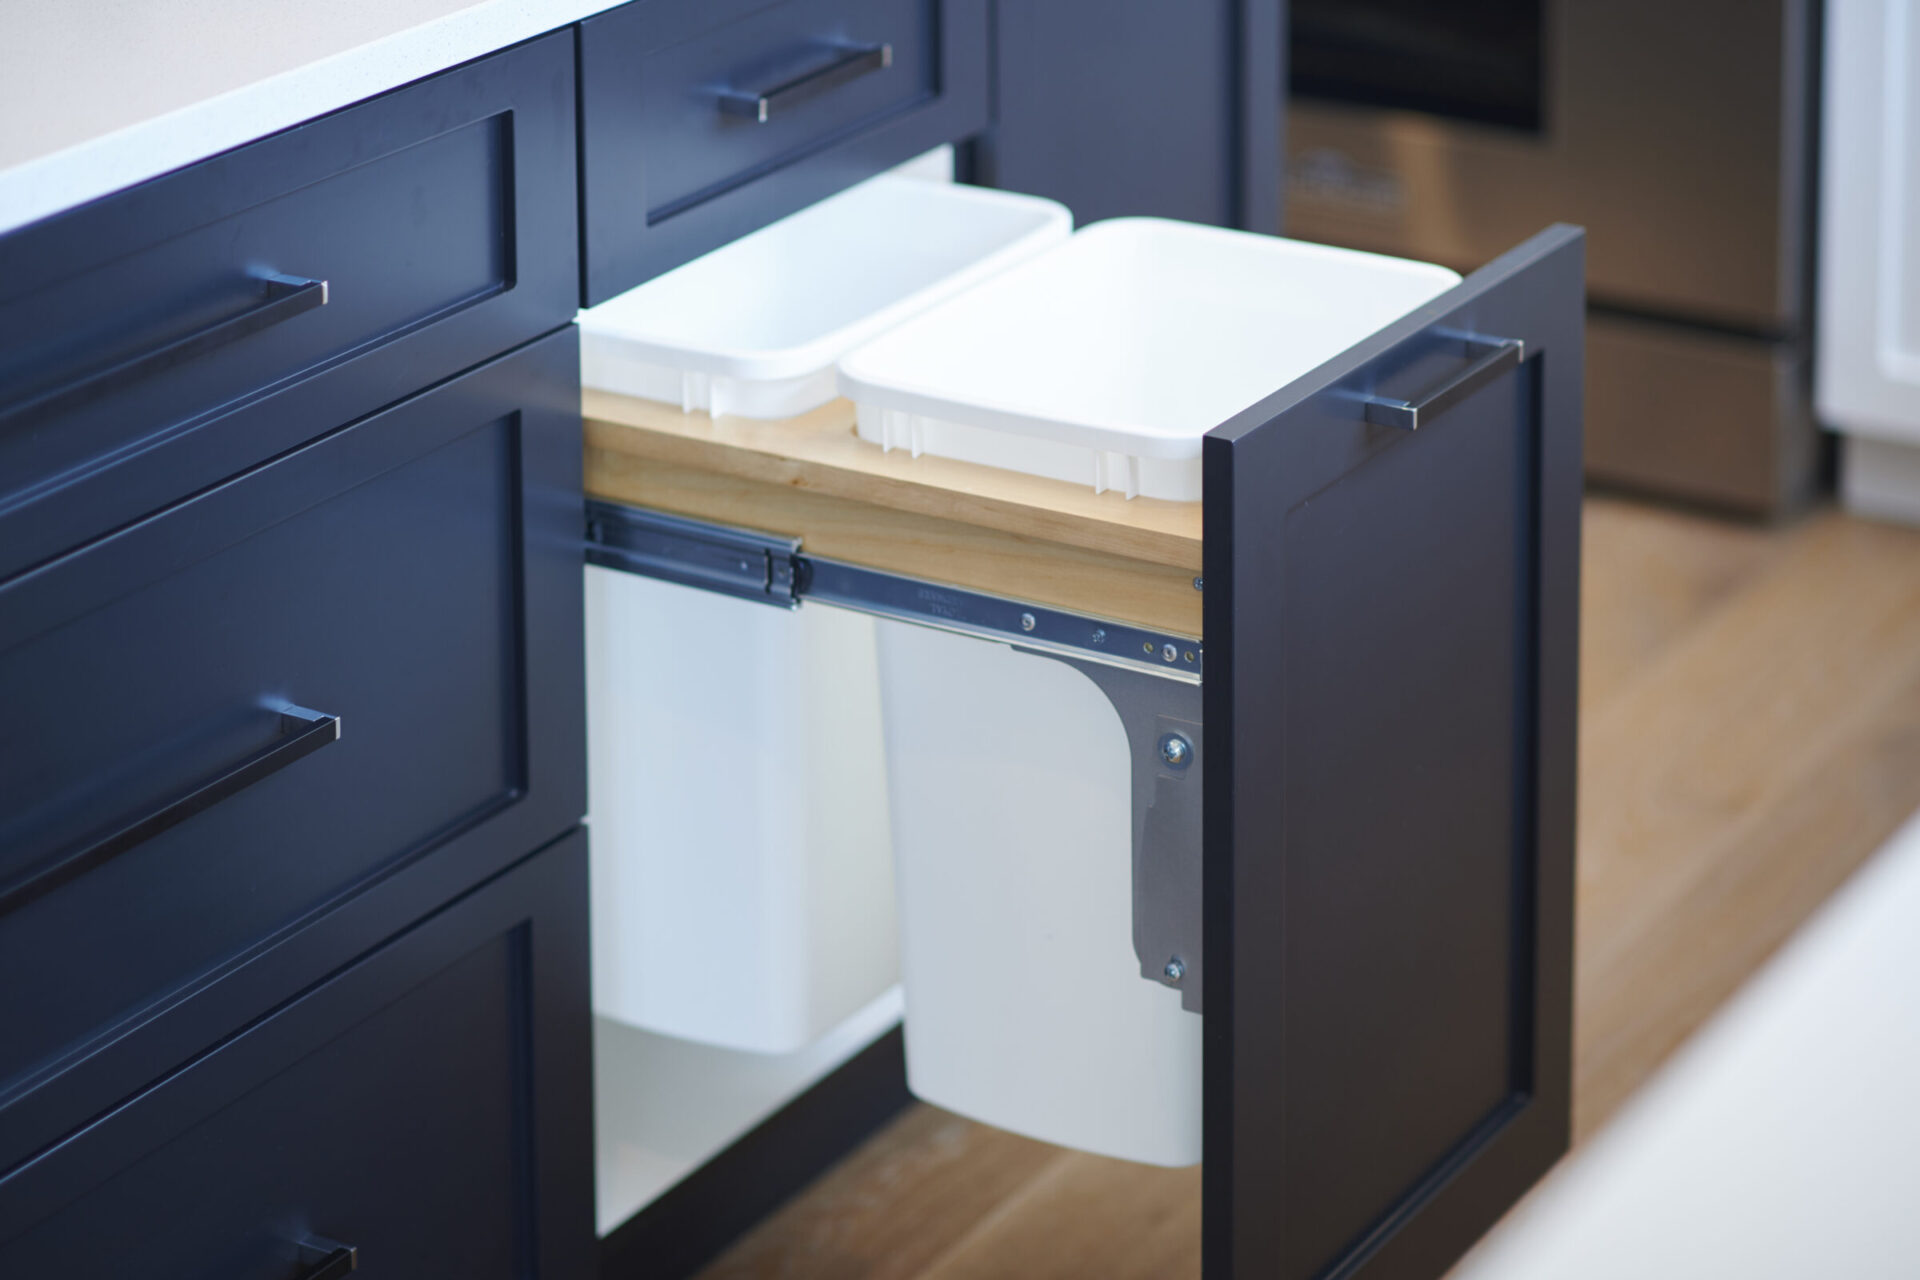 A modern kitchen drawer is partially opened, revealing two white bins with handles mounted on a wooden pull-out base within a dark cabinet.